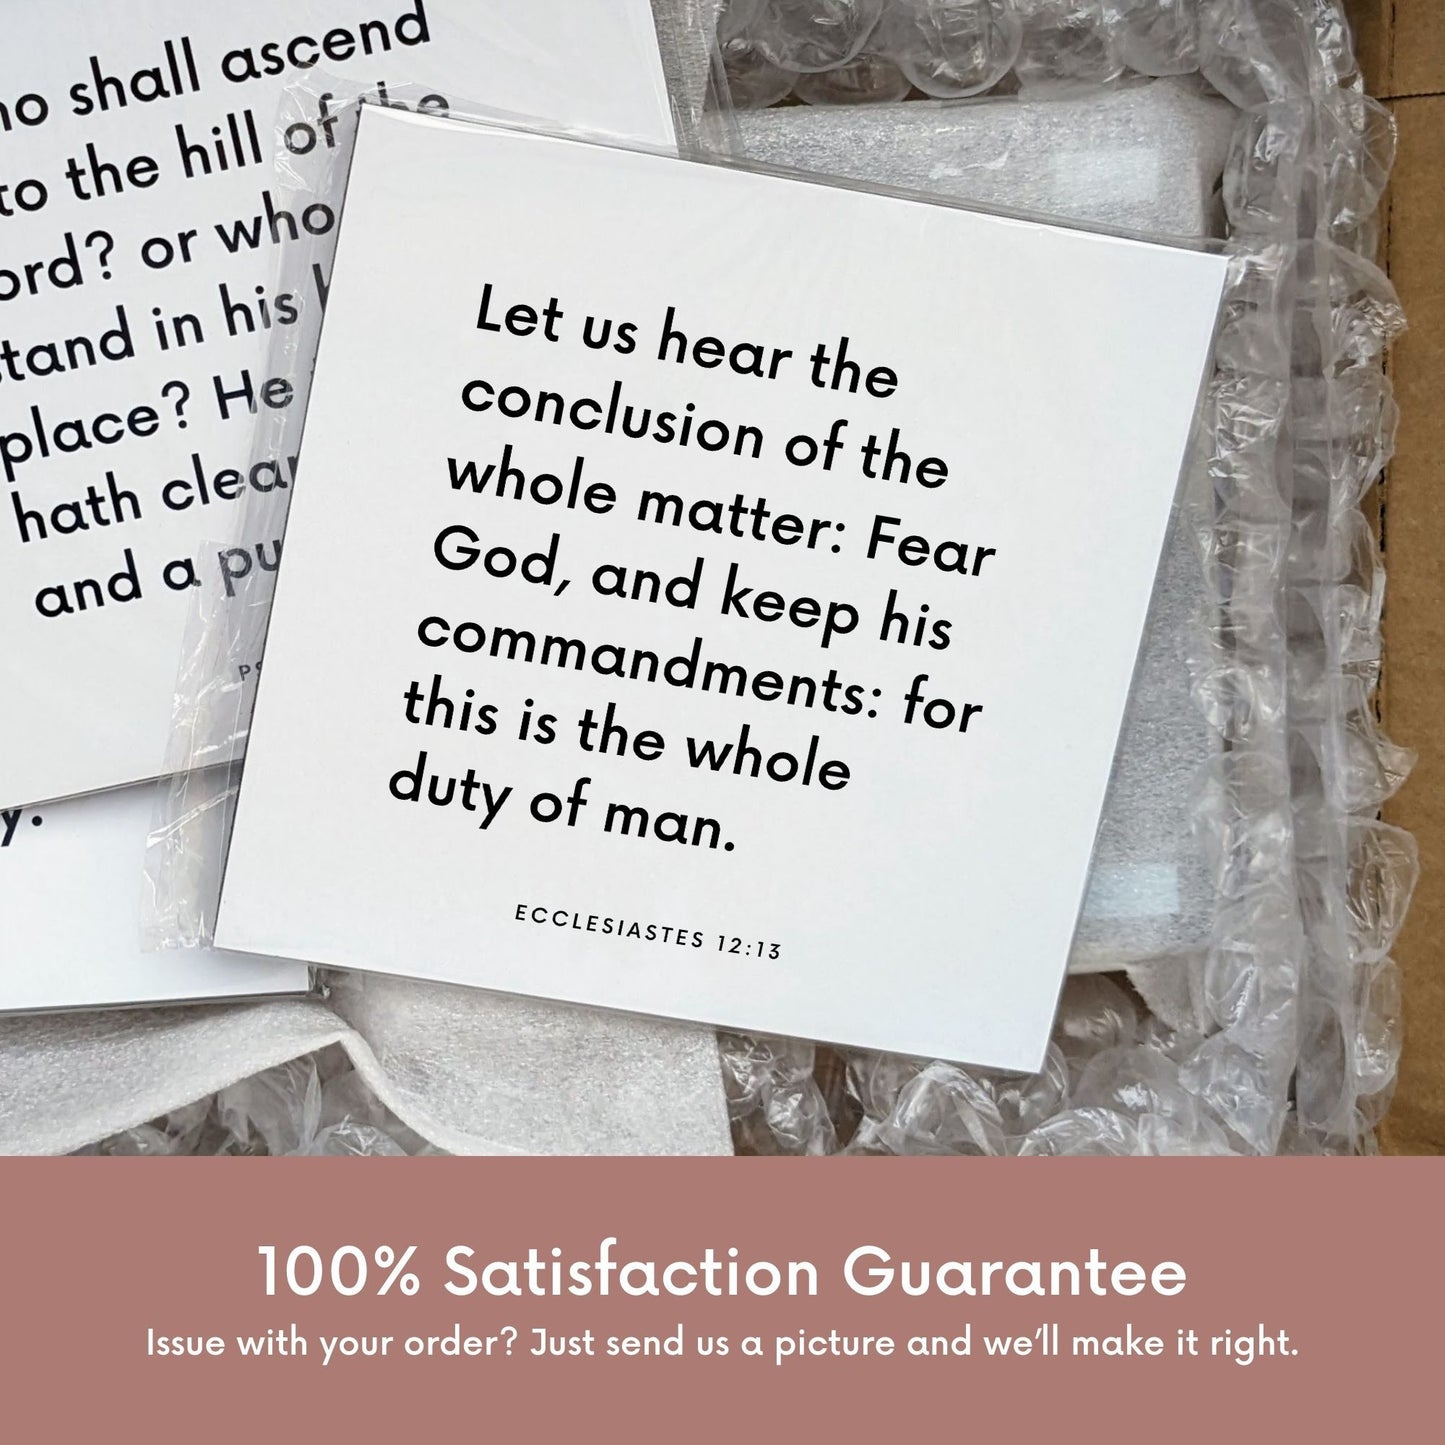 Shipping materials for scripture tile of Ecclesiastes 12:13 - "Let us hear the conclusion of the whole matter: Fear God"